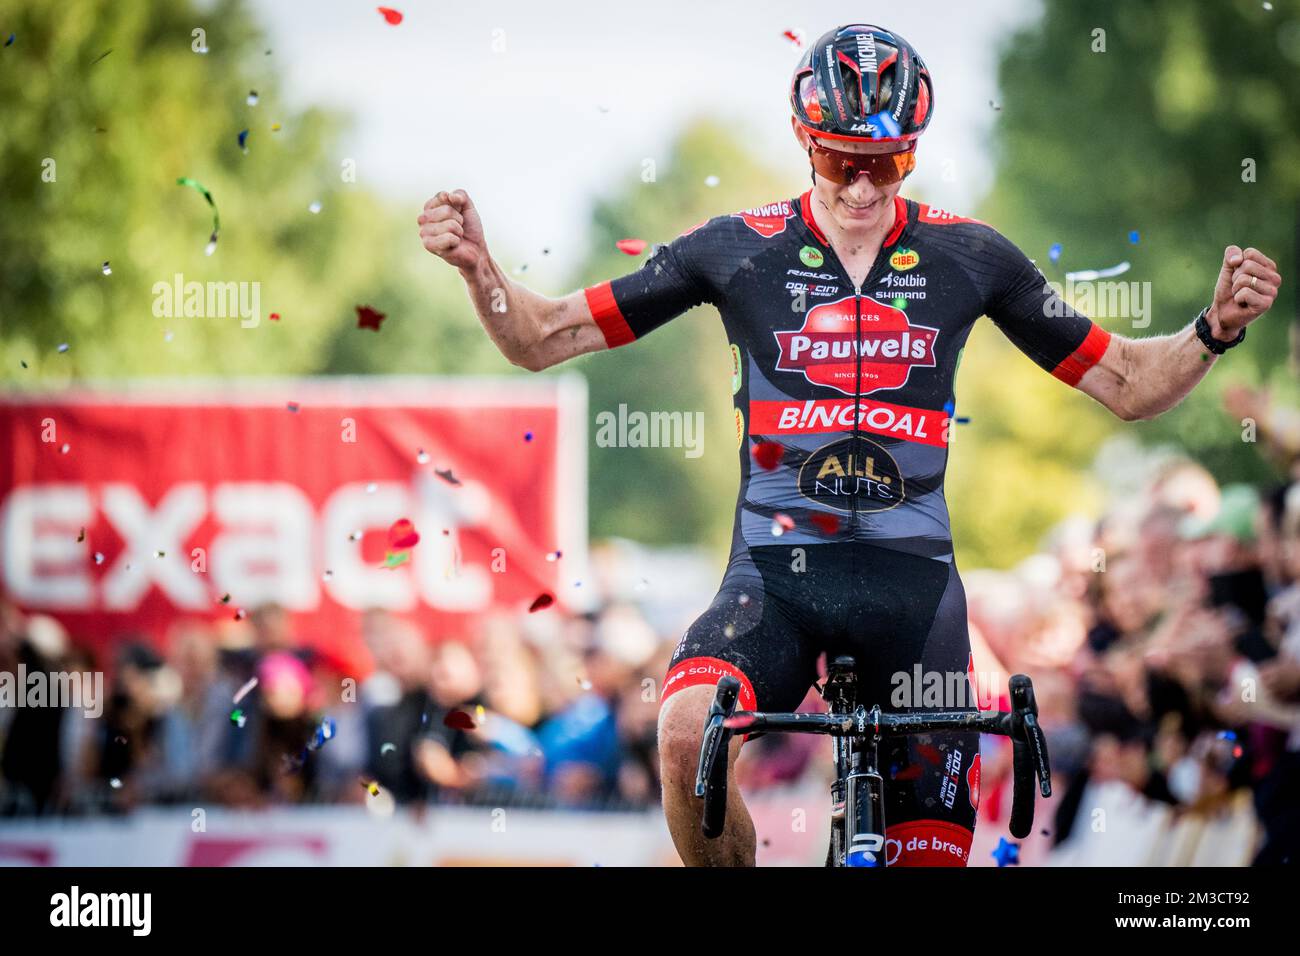 Belgian Michael Vanthourenhout celebrates as he crosses the finish line to win the men's elite race of the 'Berencross Meulebeke' cyclocross cycling event, race 3/8 in the 'Exact Cross' competition, Saturday 01 October 2022 in Meulebeke. BELGA PHOTO JASPER JACOBS Stock Photo